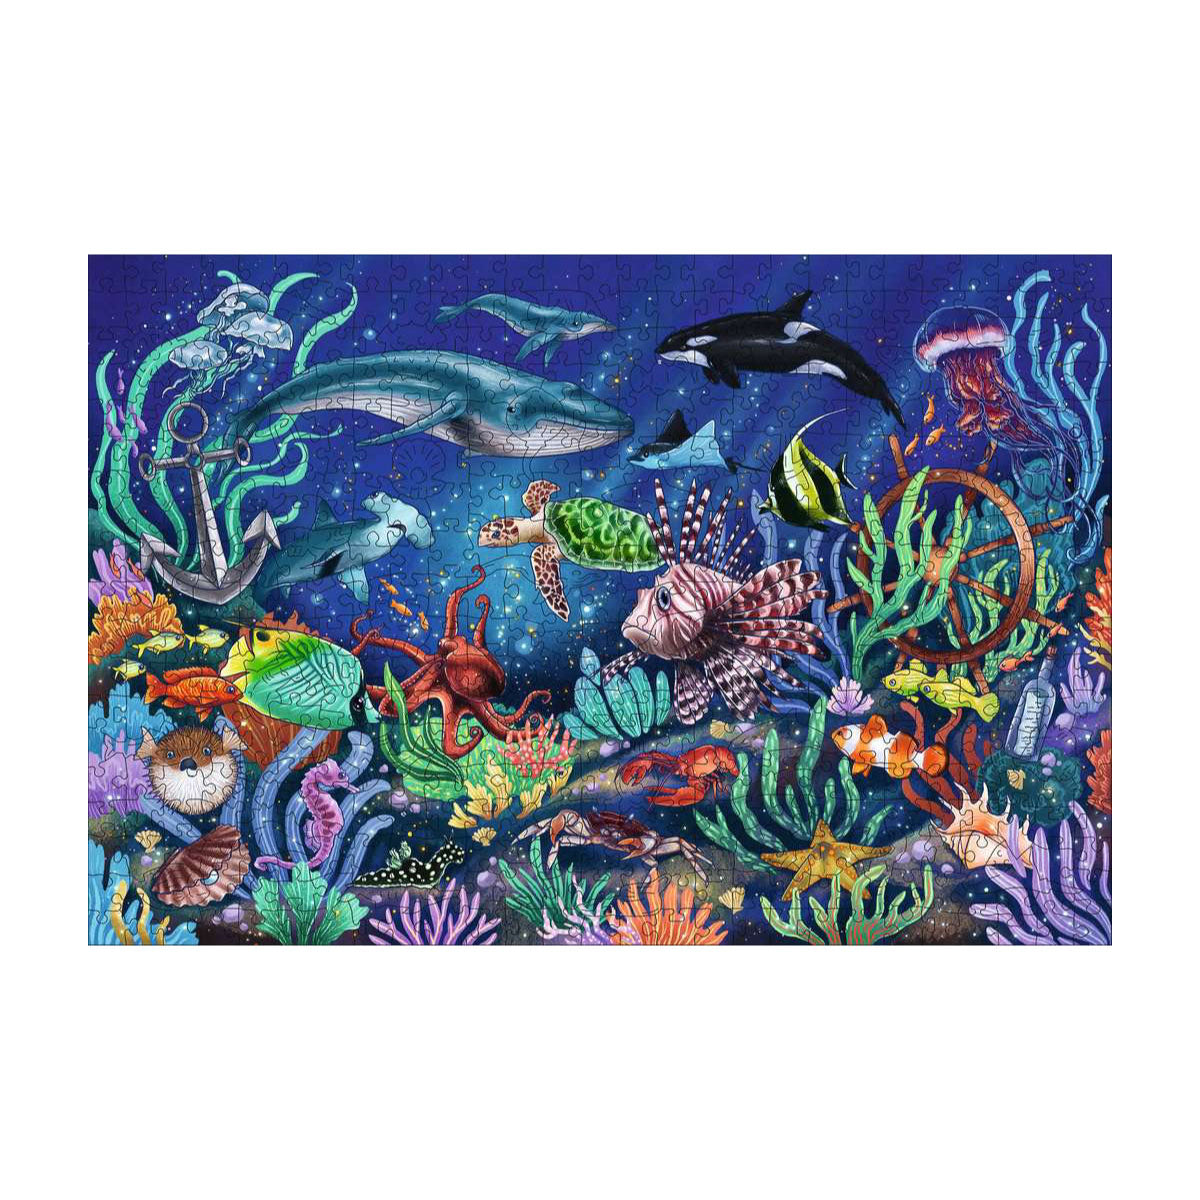 Ravensburger Wooden Jigsaw Puzzle Under the Sea - 500 Pieces